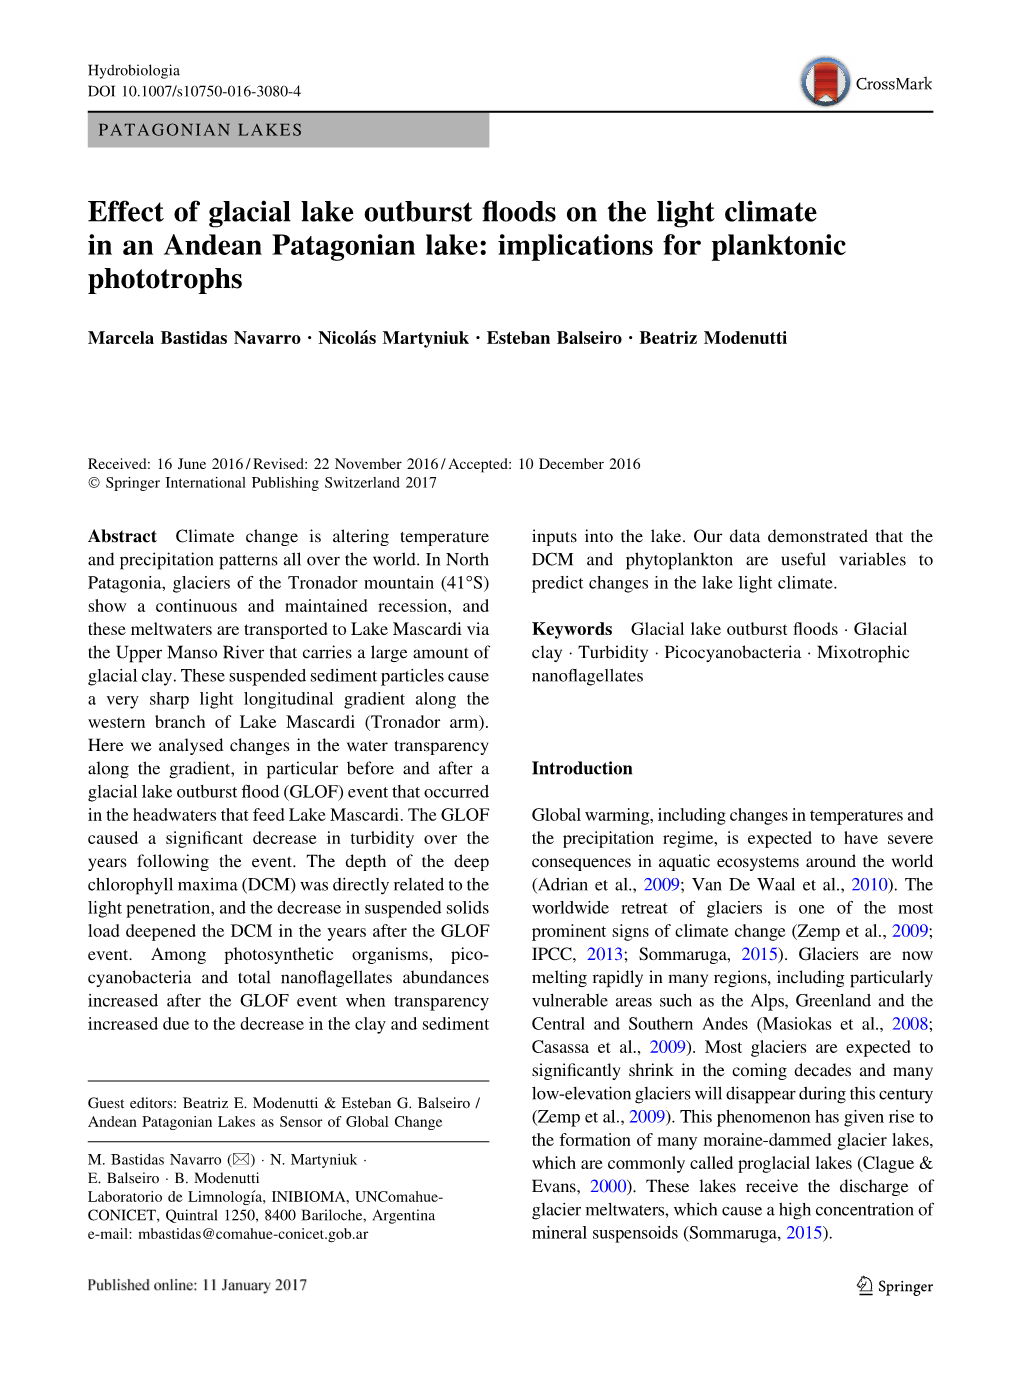 Effect of Glacial Lake Outburst Floods on the Light Climate in an Andean